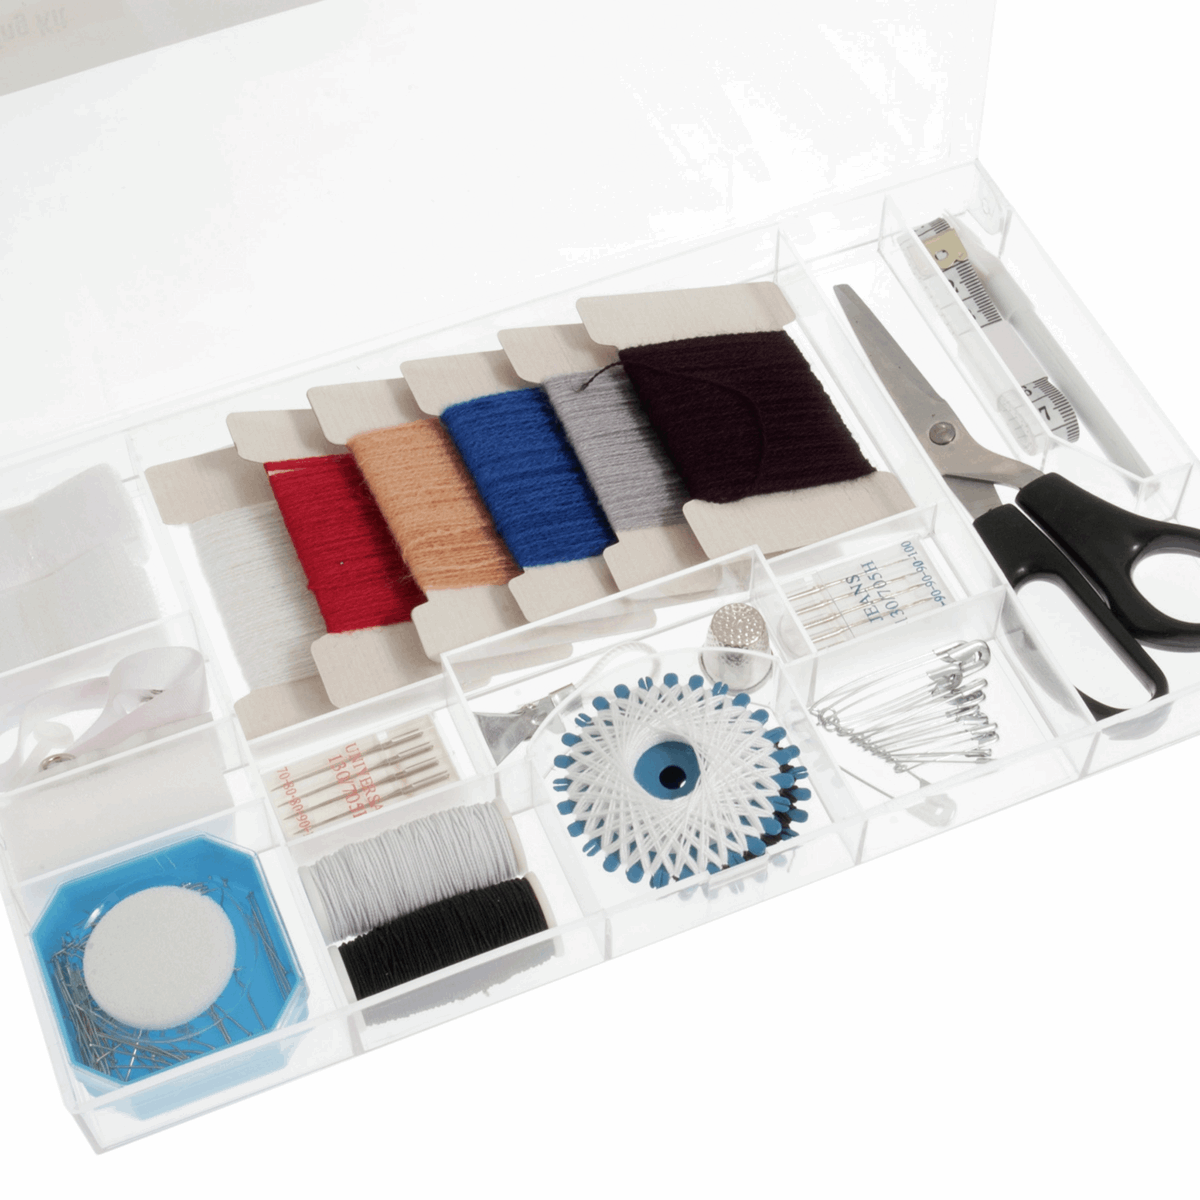 Professional Sewing Kit Bundle with a huge 167 pieces